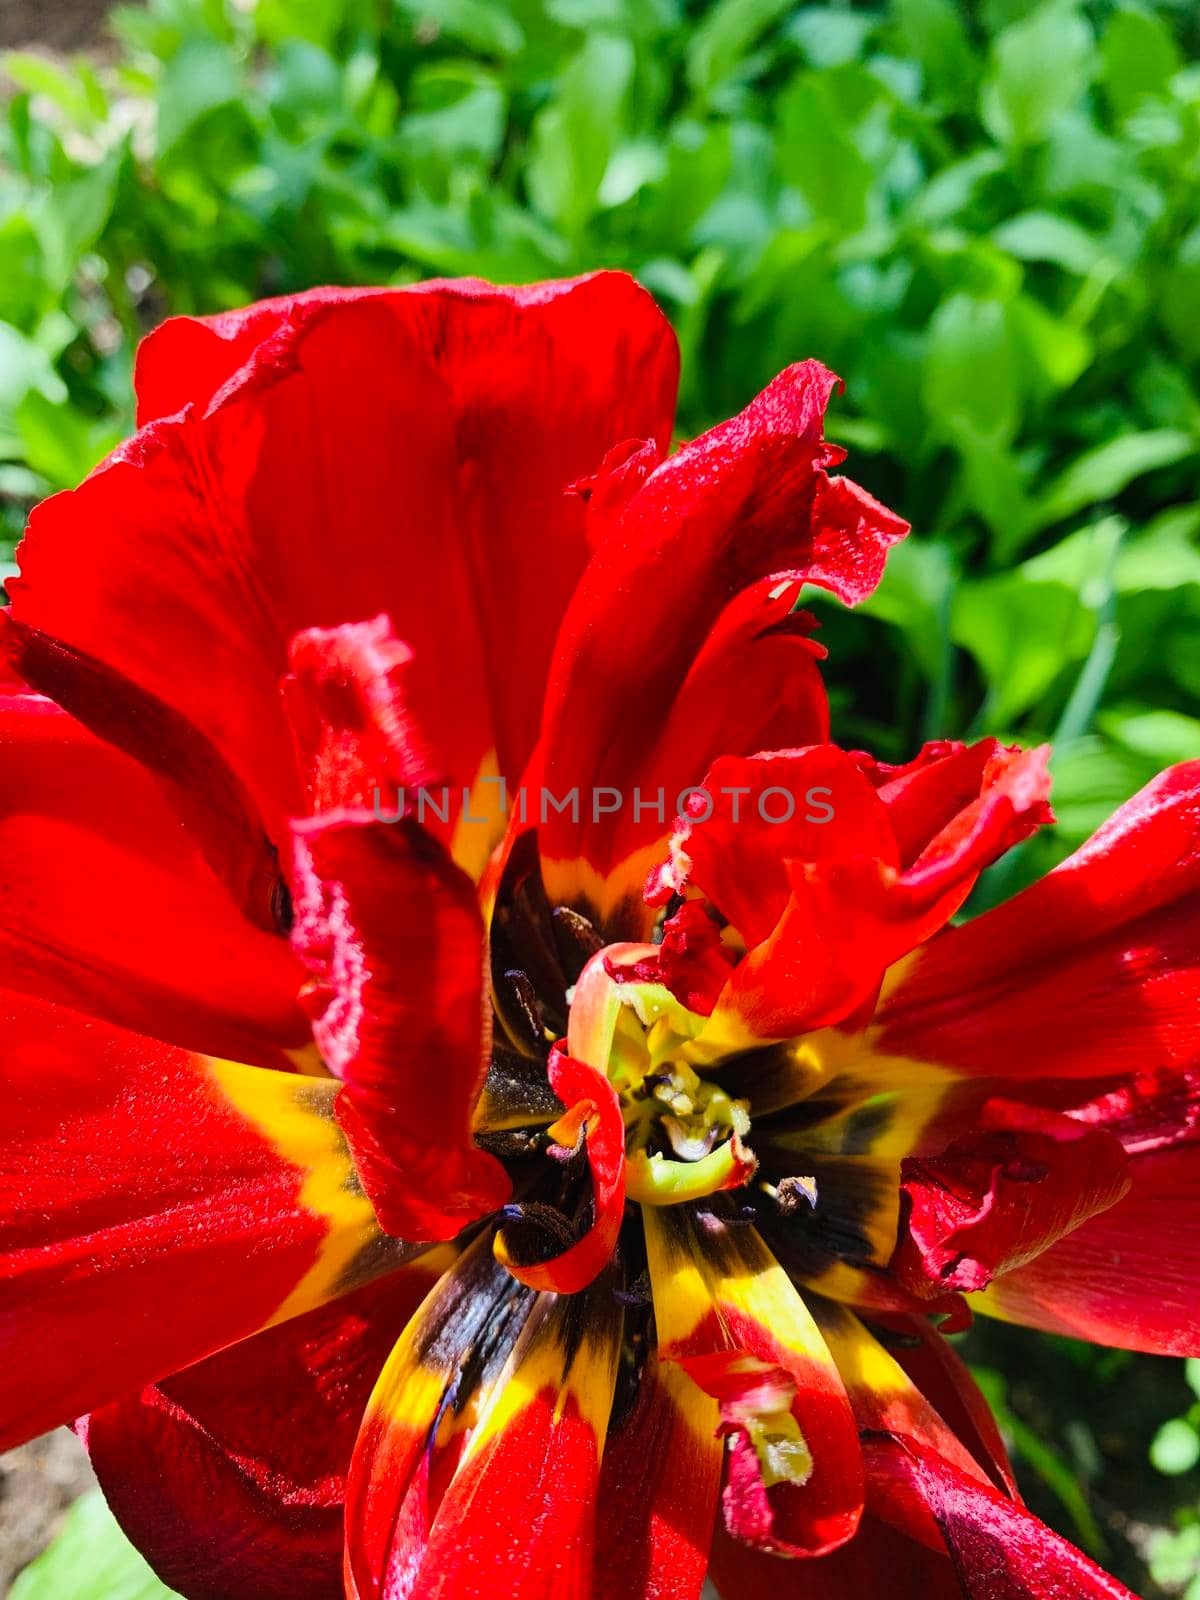 The Flower of a red peony swings in the wind, dried petals, green background, close up